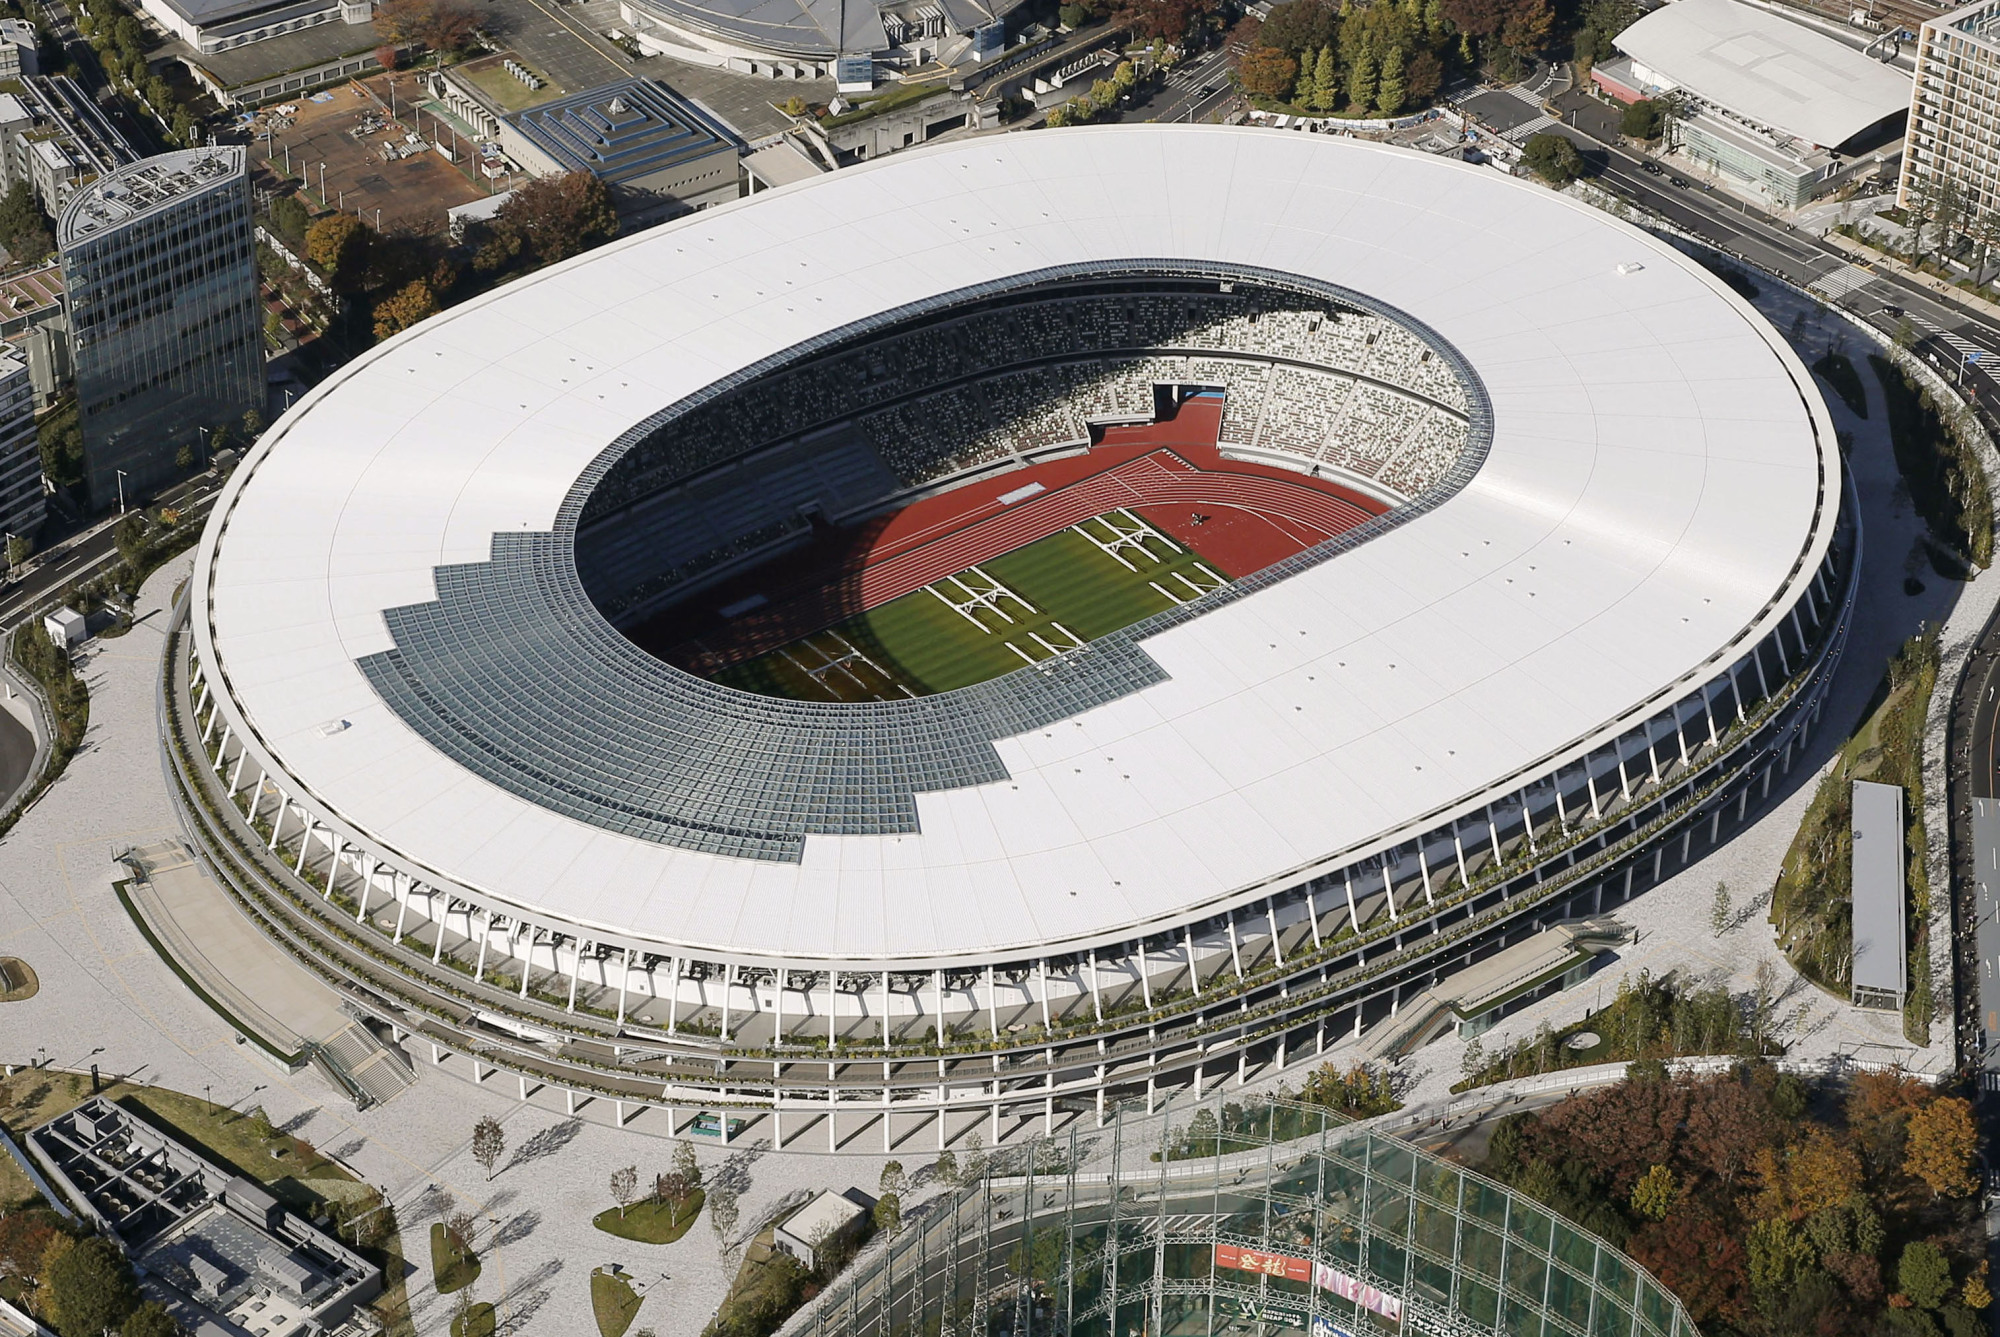 The newly completed National Stadium will serve as the main venue for the 2020 Tokyo Olympics, but not enough thought and planning has been given to its use after the games. | KYODO